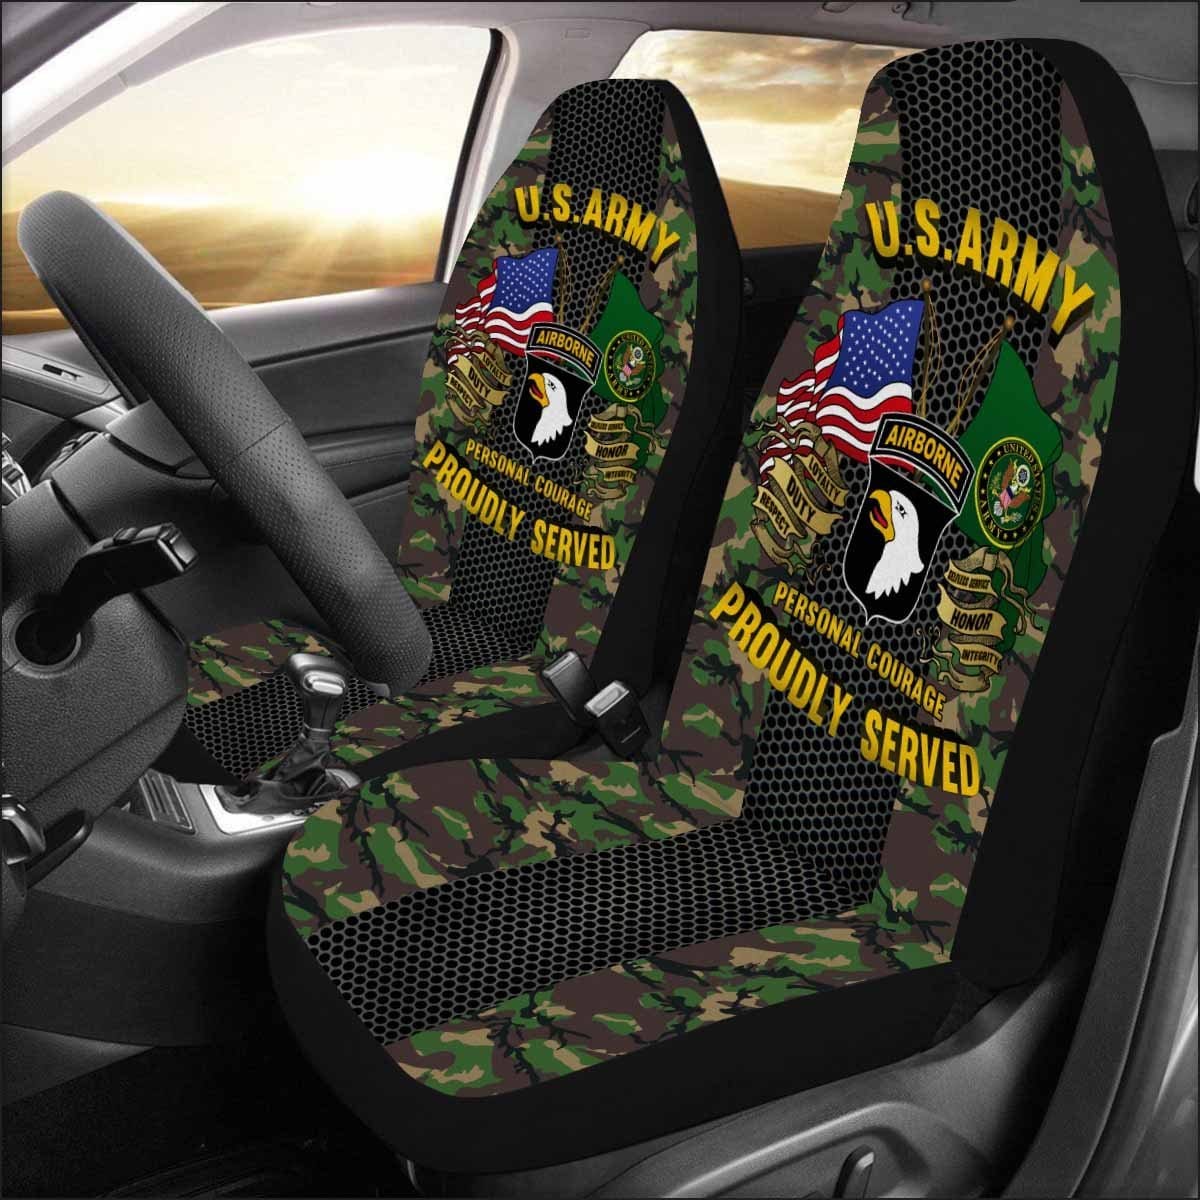 US Army 101st Airborne Division Car Seat Covers (Set of 2)-SeatCovers-Army-CSIB-Veterans Nation